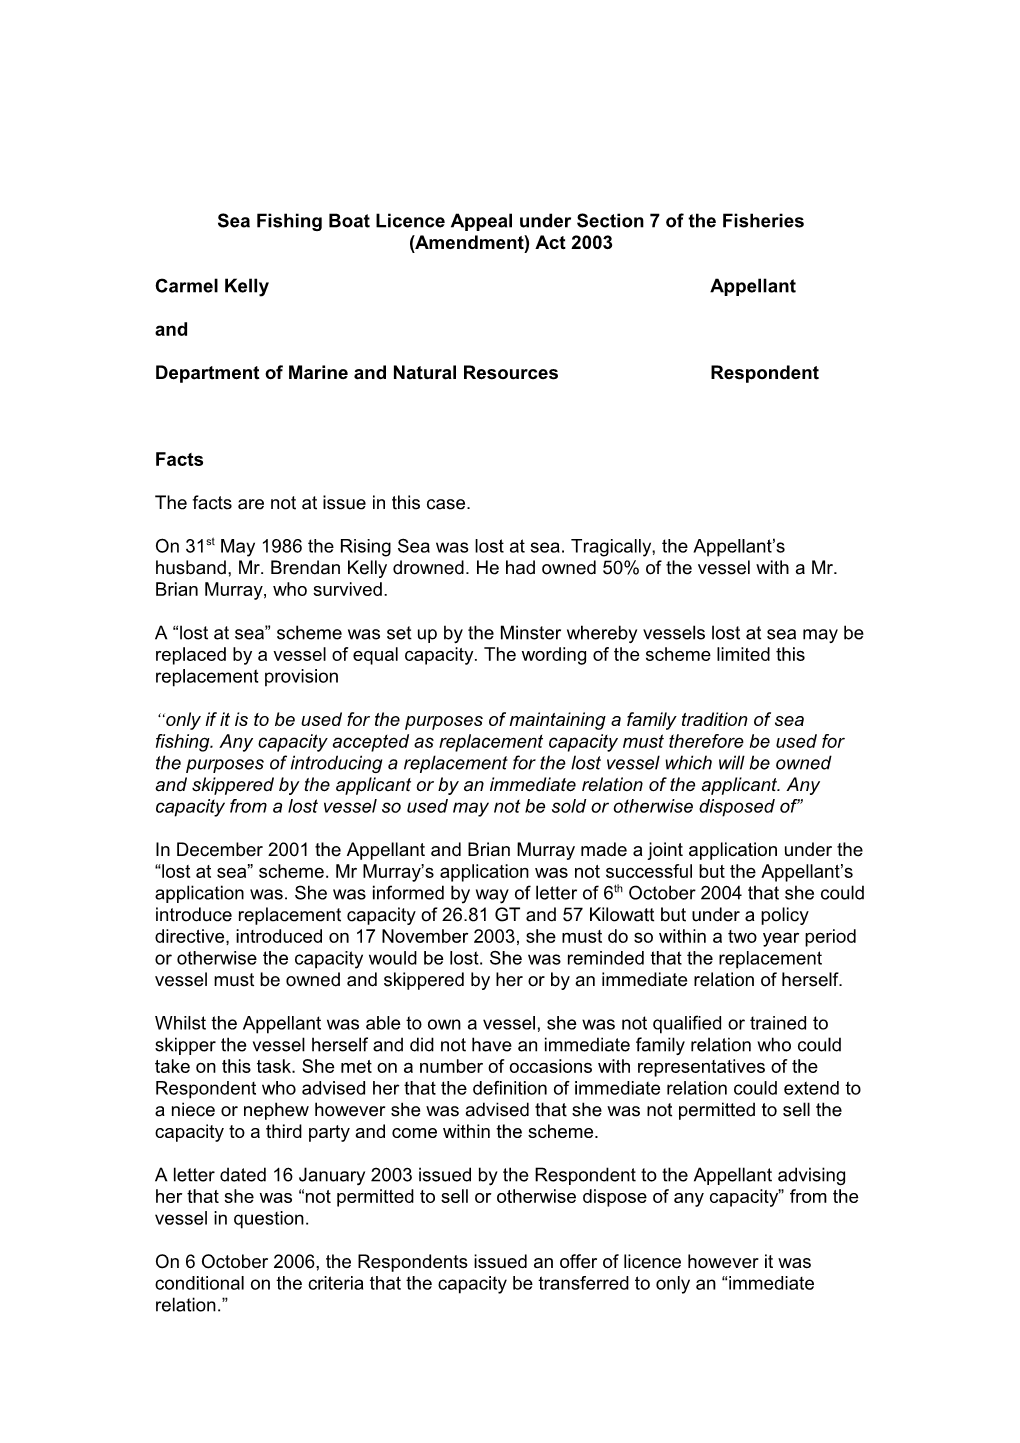 Sea Fishing Boat Licence Appeal Under Section 7 of the Fisheries (Amendment) Act 2003